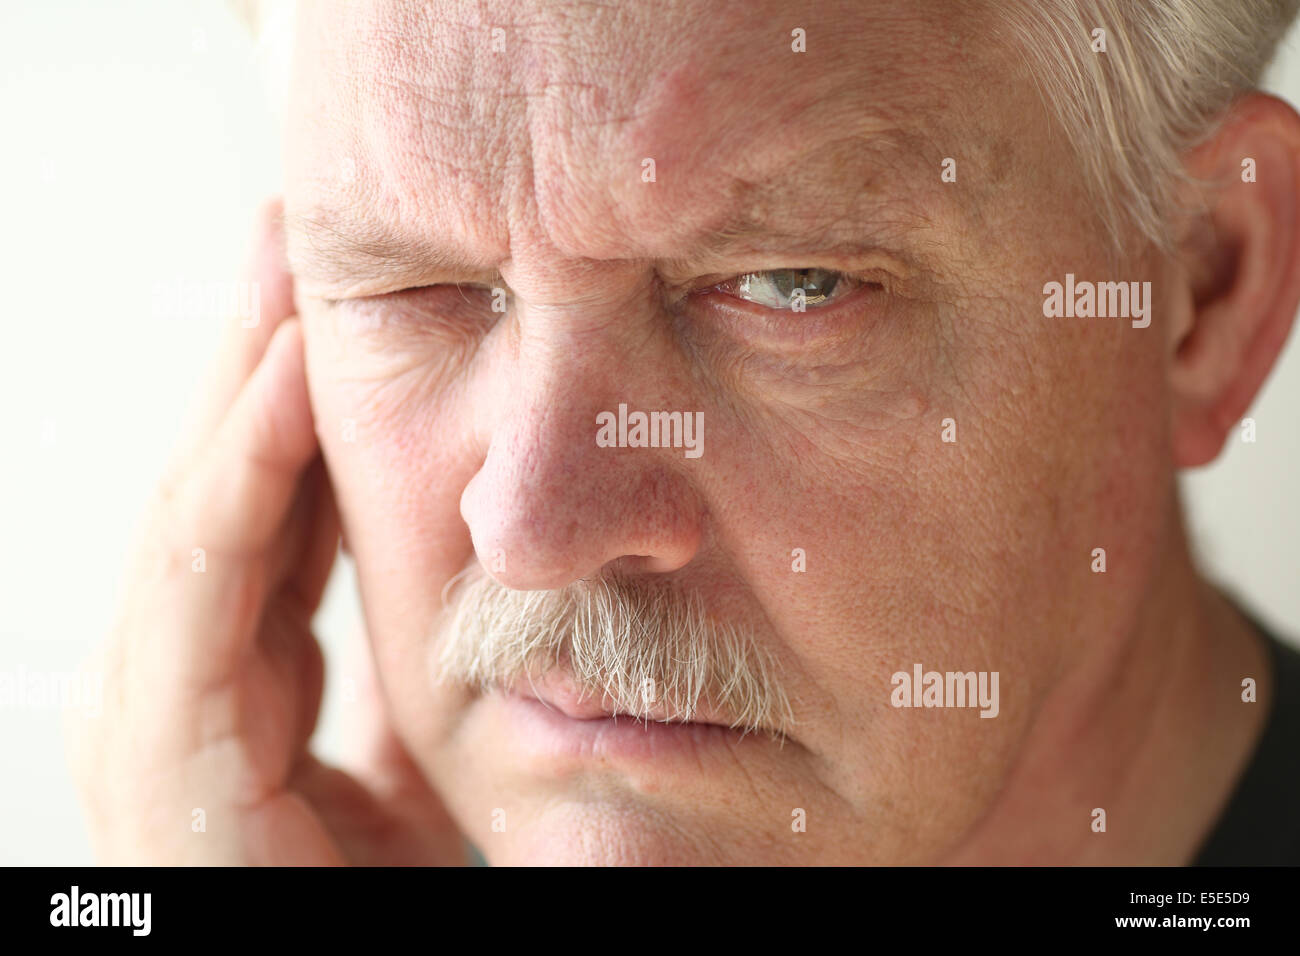 man with pain or irritation on one side of his face Stock Photo